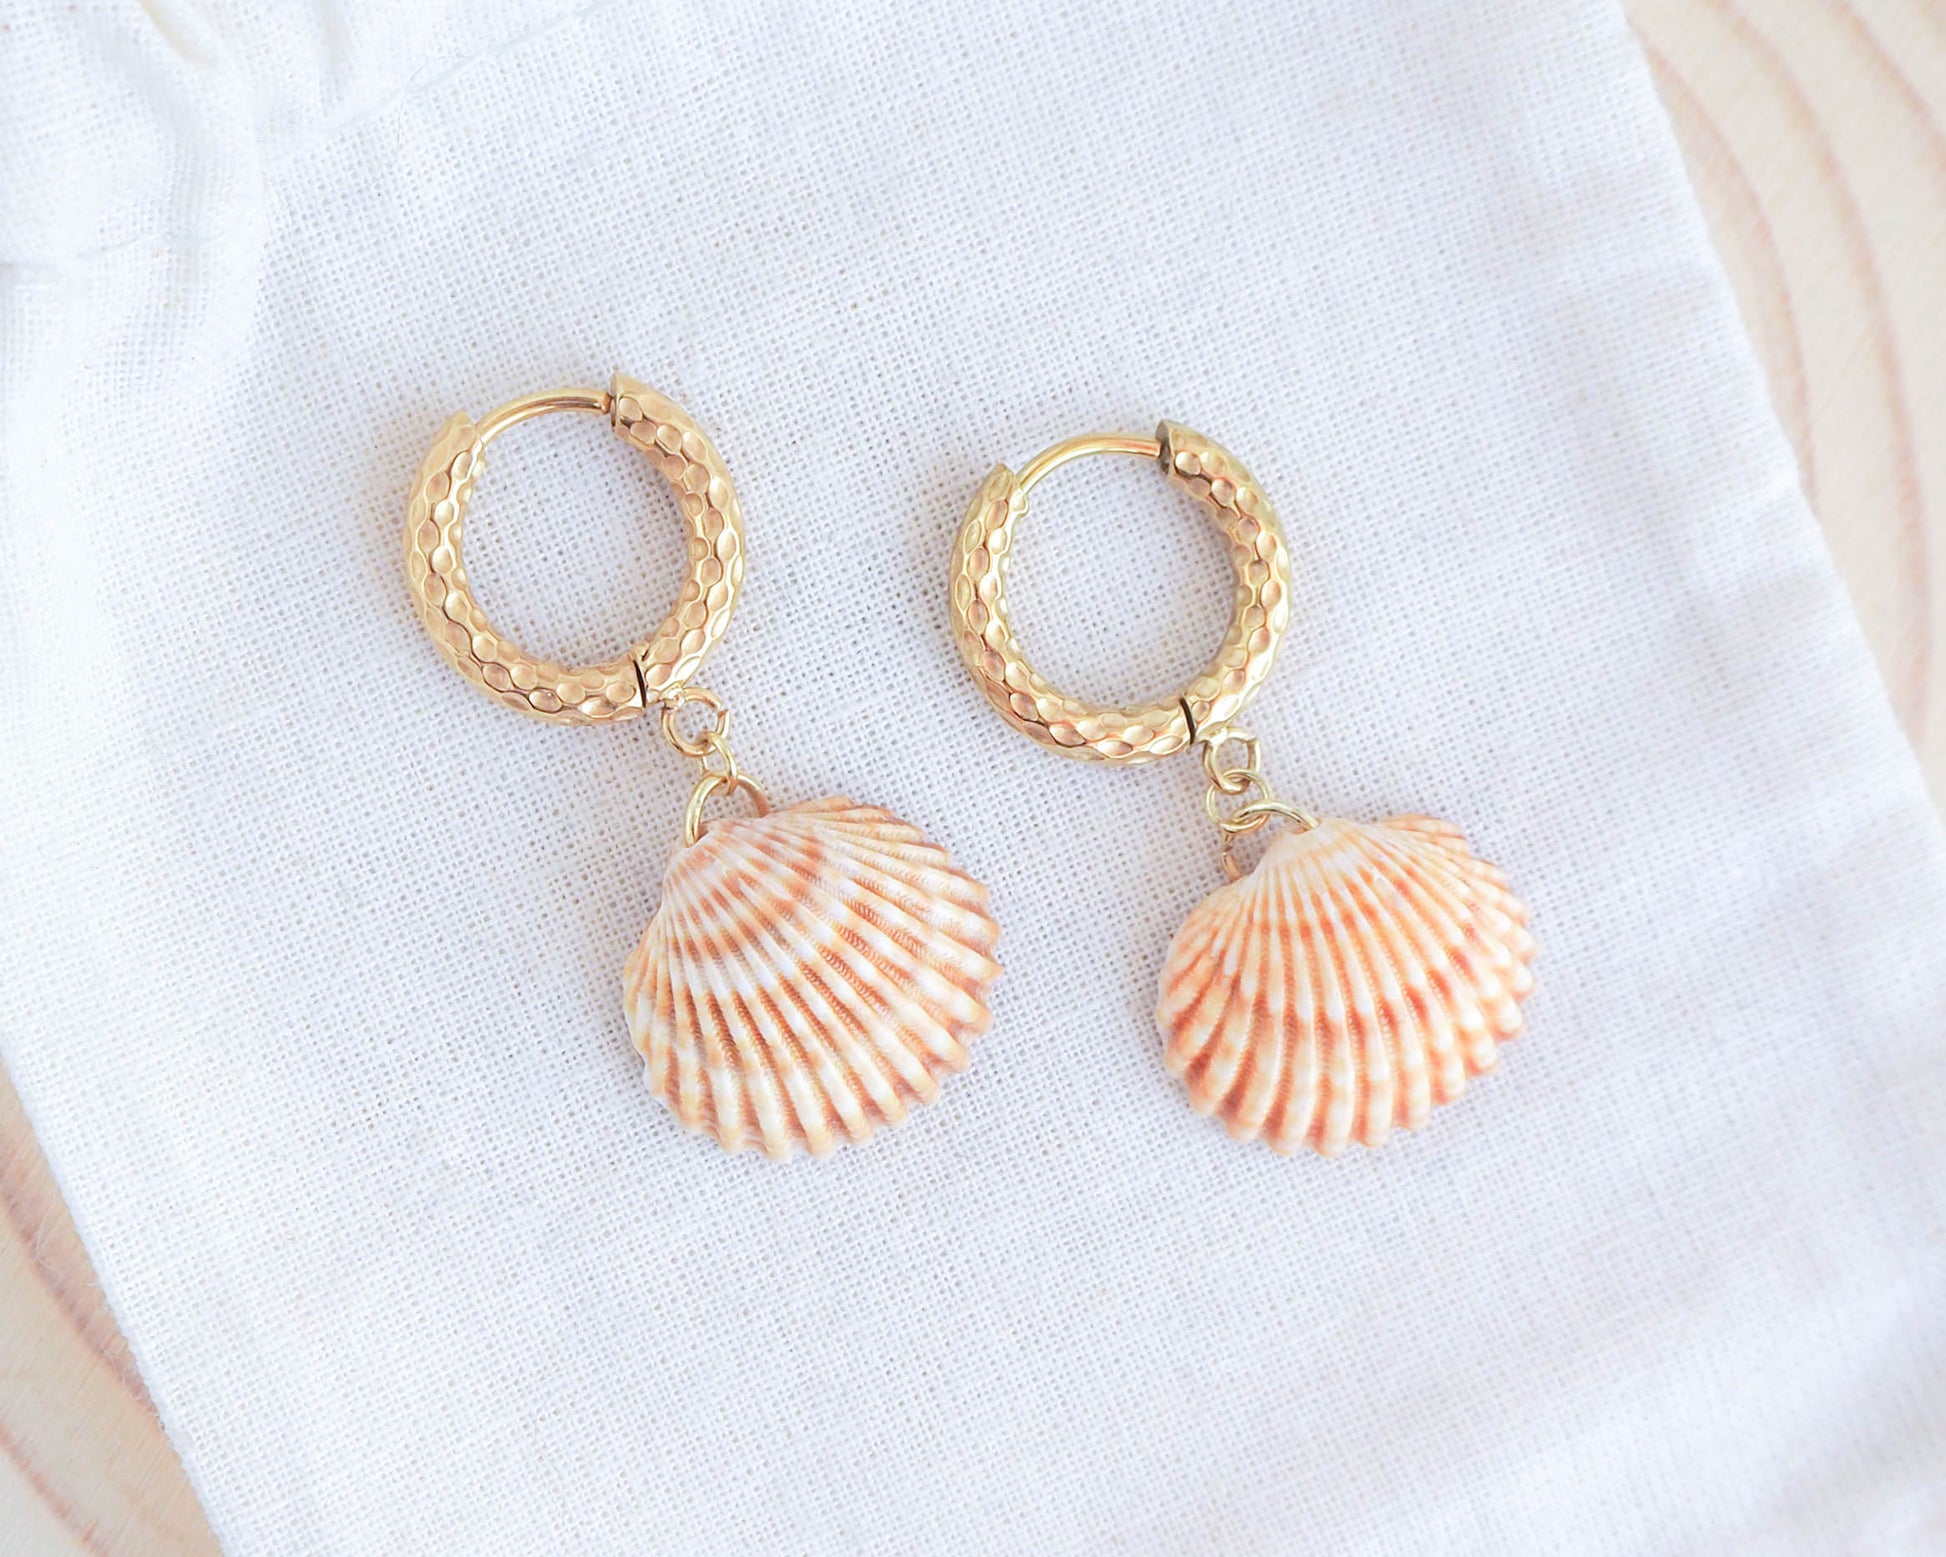 Gold Mediterranean Cockle Shell Earrings with Gold Loop Hooks – Seaside Chic Jewelry